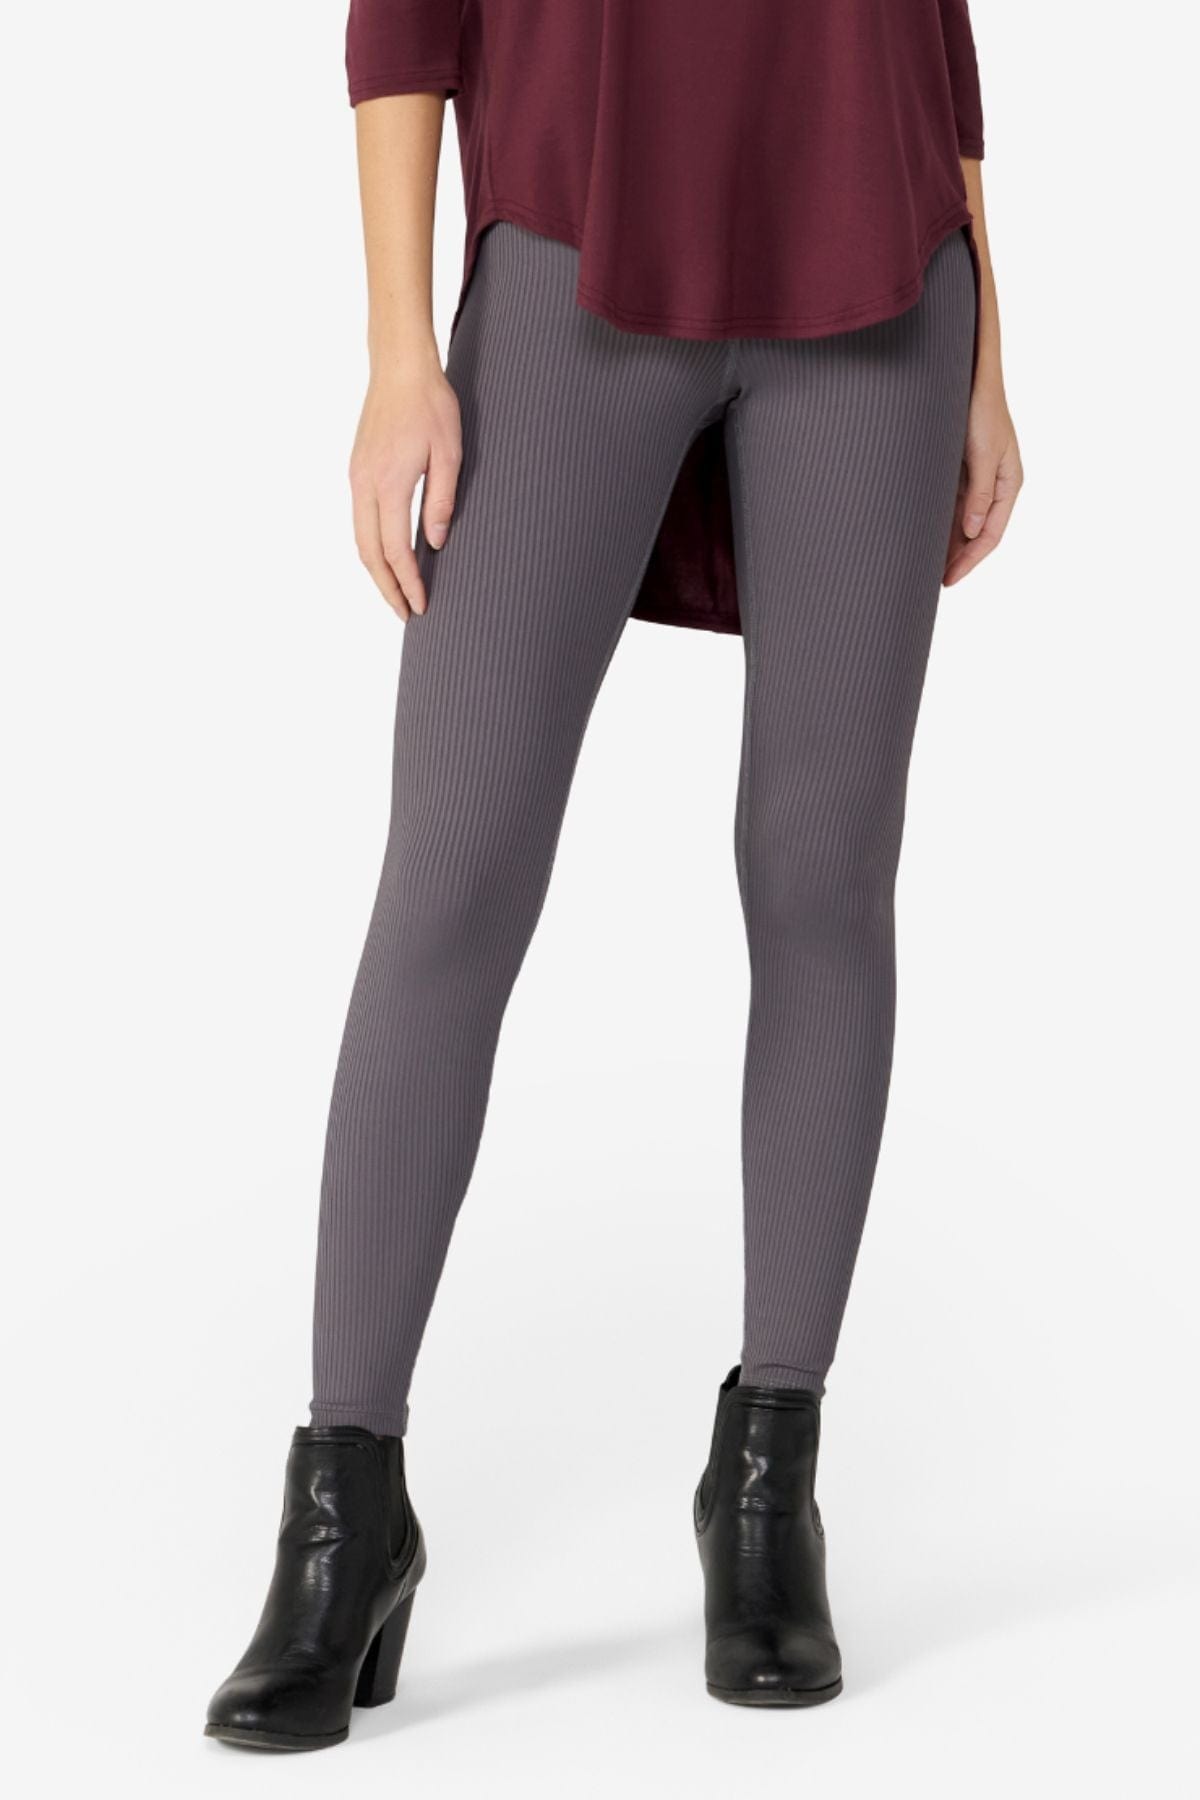 Campbell 7/8 Legging in Armour